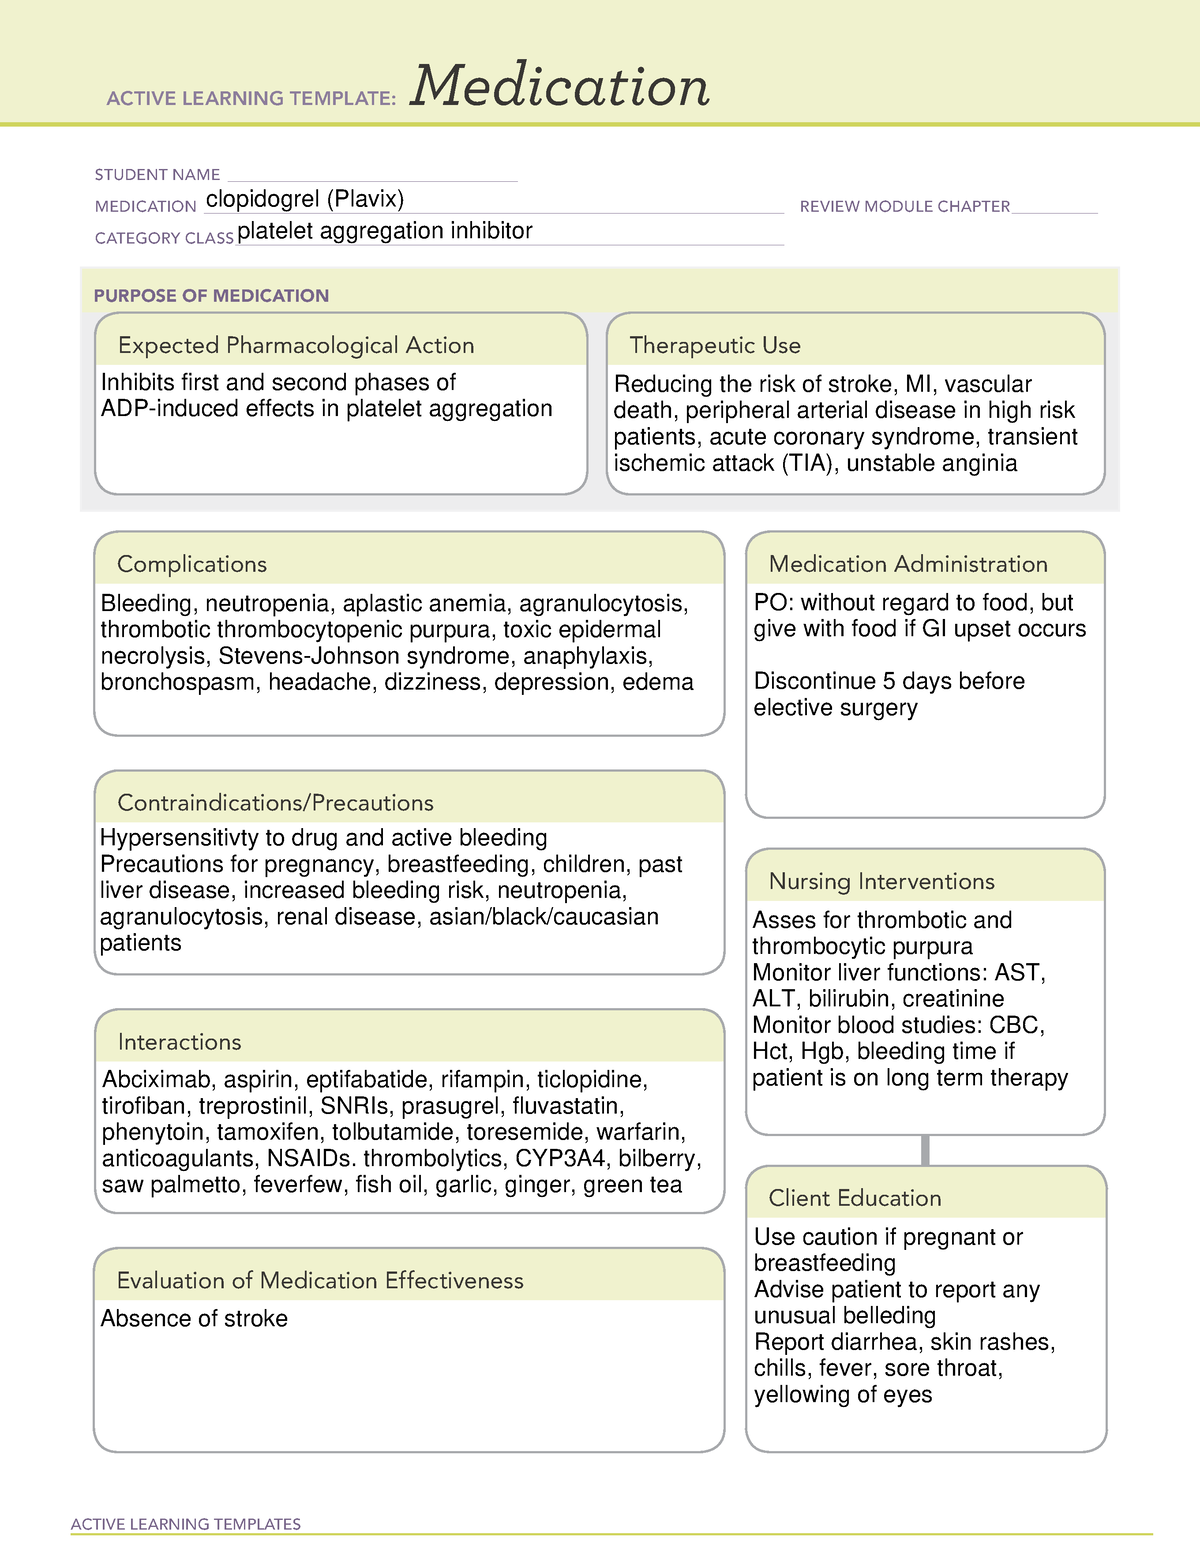 clopidogrel Active Learning Template ACTIVE LEARNING TEMPLATES